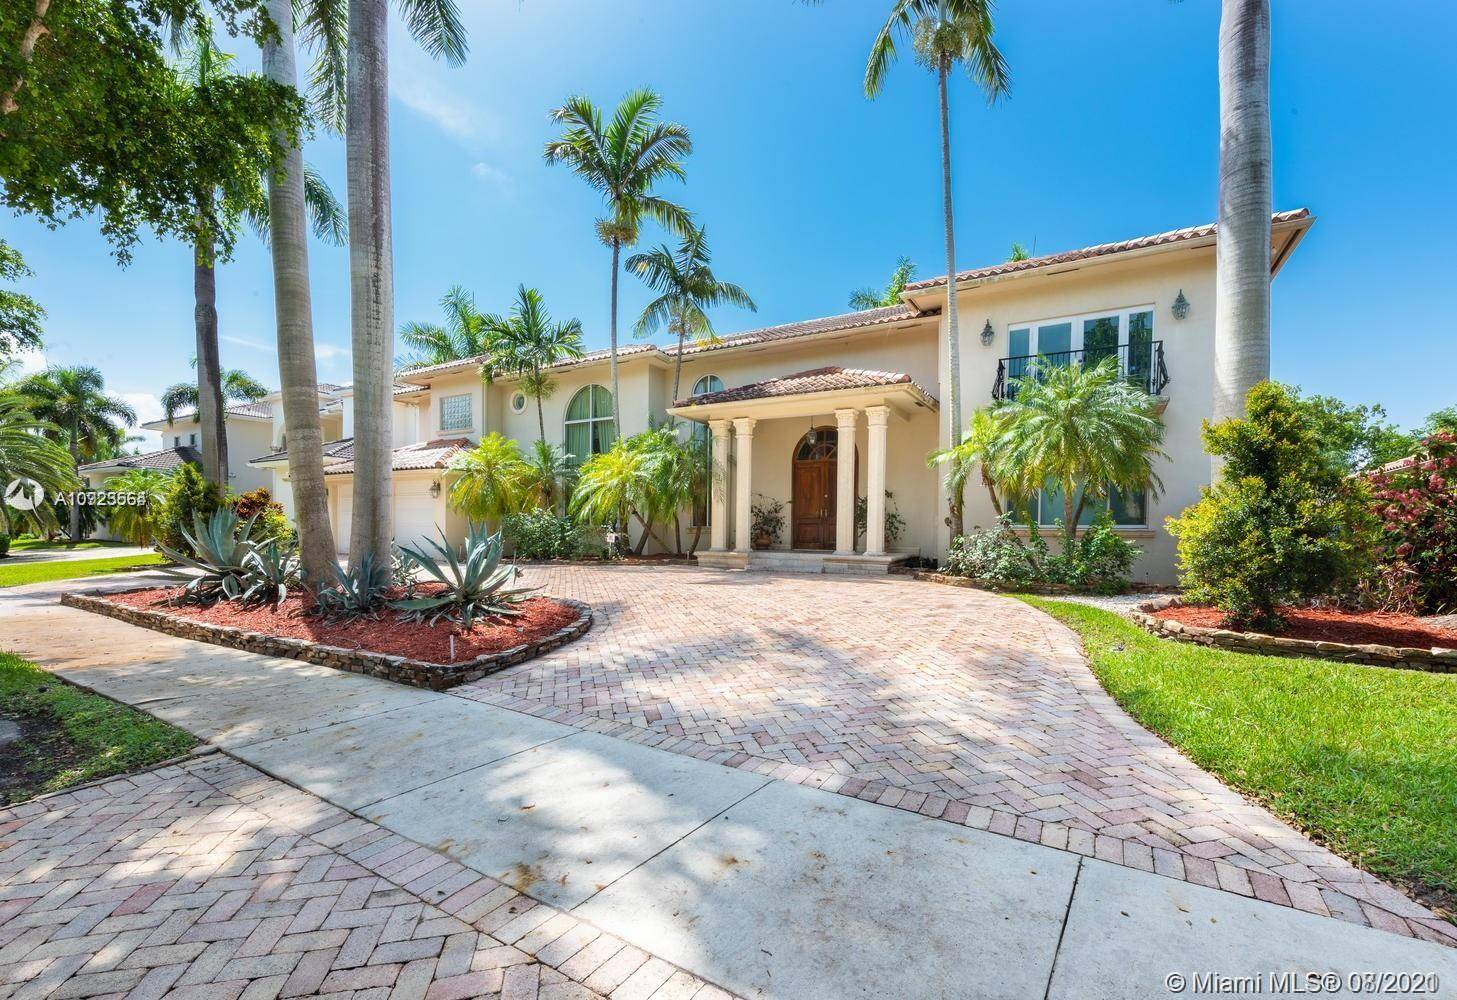 Custom palatial home located inside the Mansions section of the private guard gated community of Royal Palm Estates.